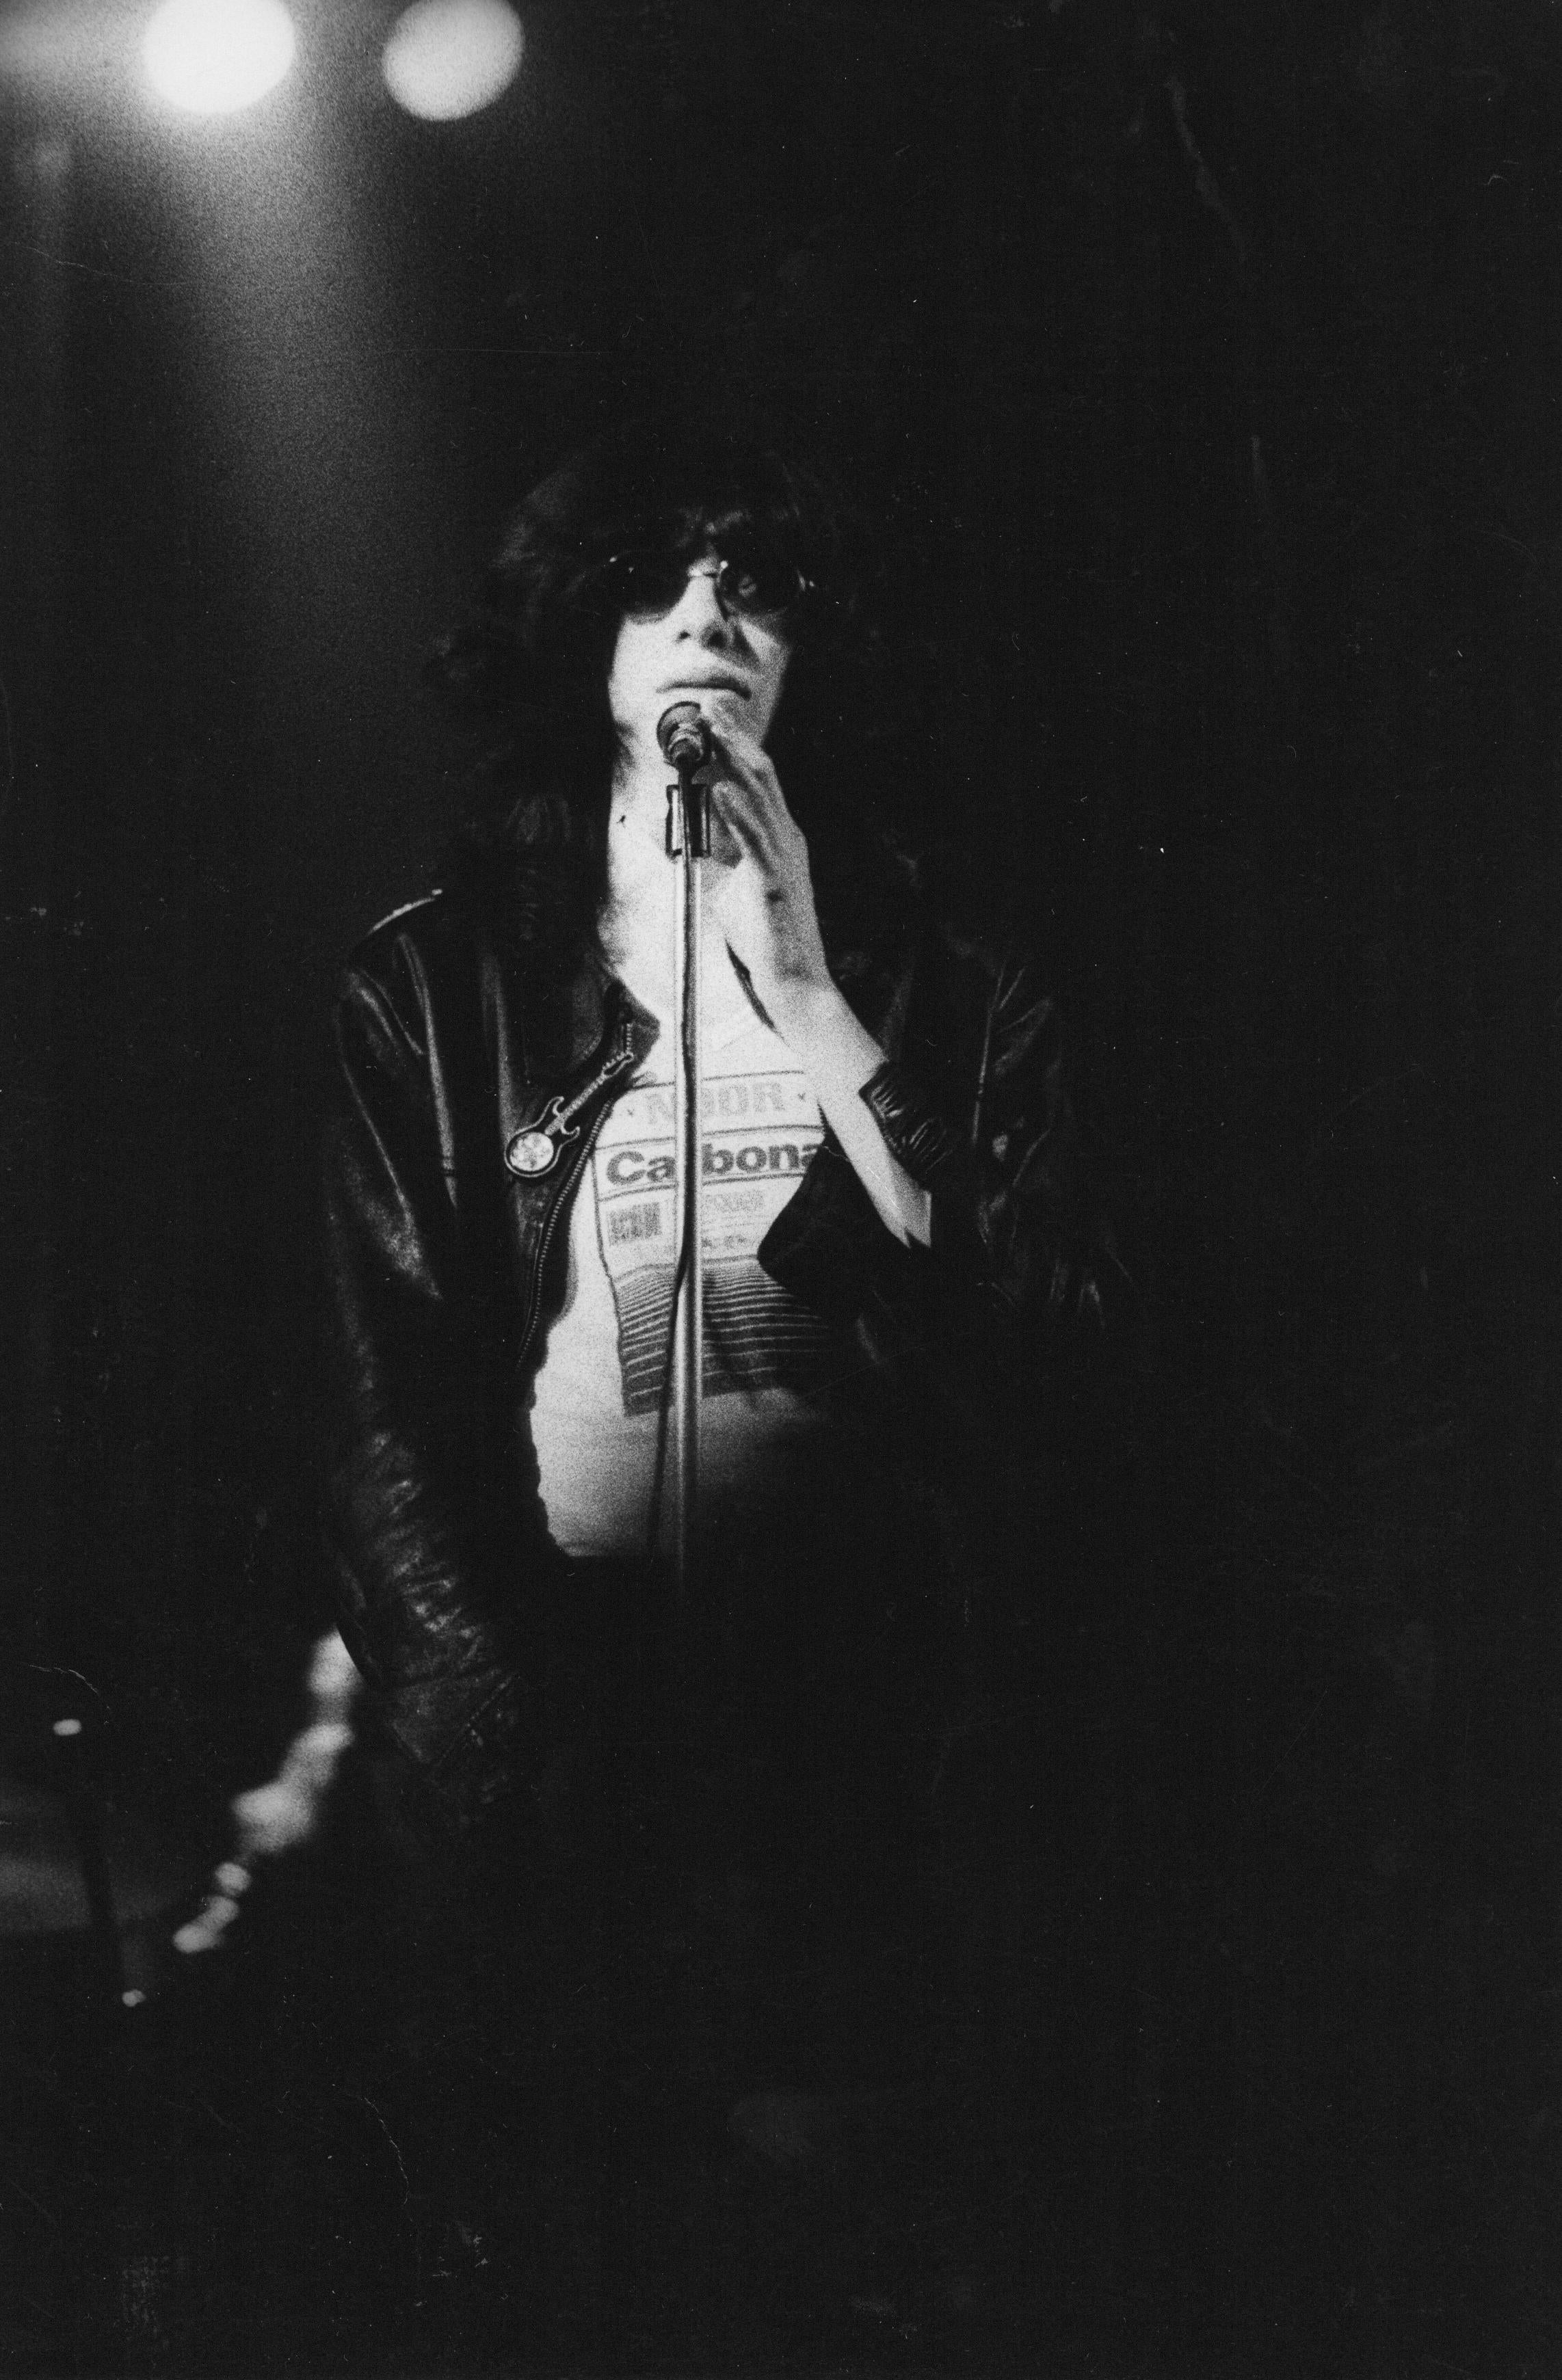 Paul Canty Black and White Photograph - Joey Ramone at the Microphone Vintage Original Photograph